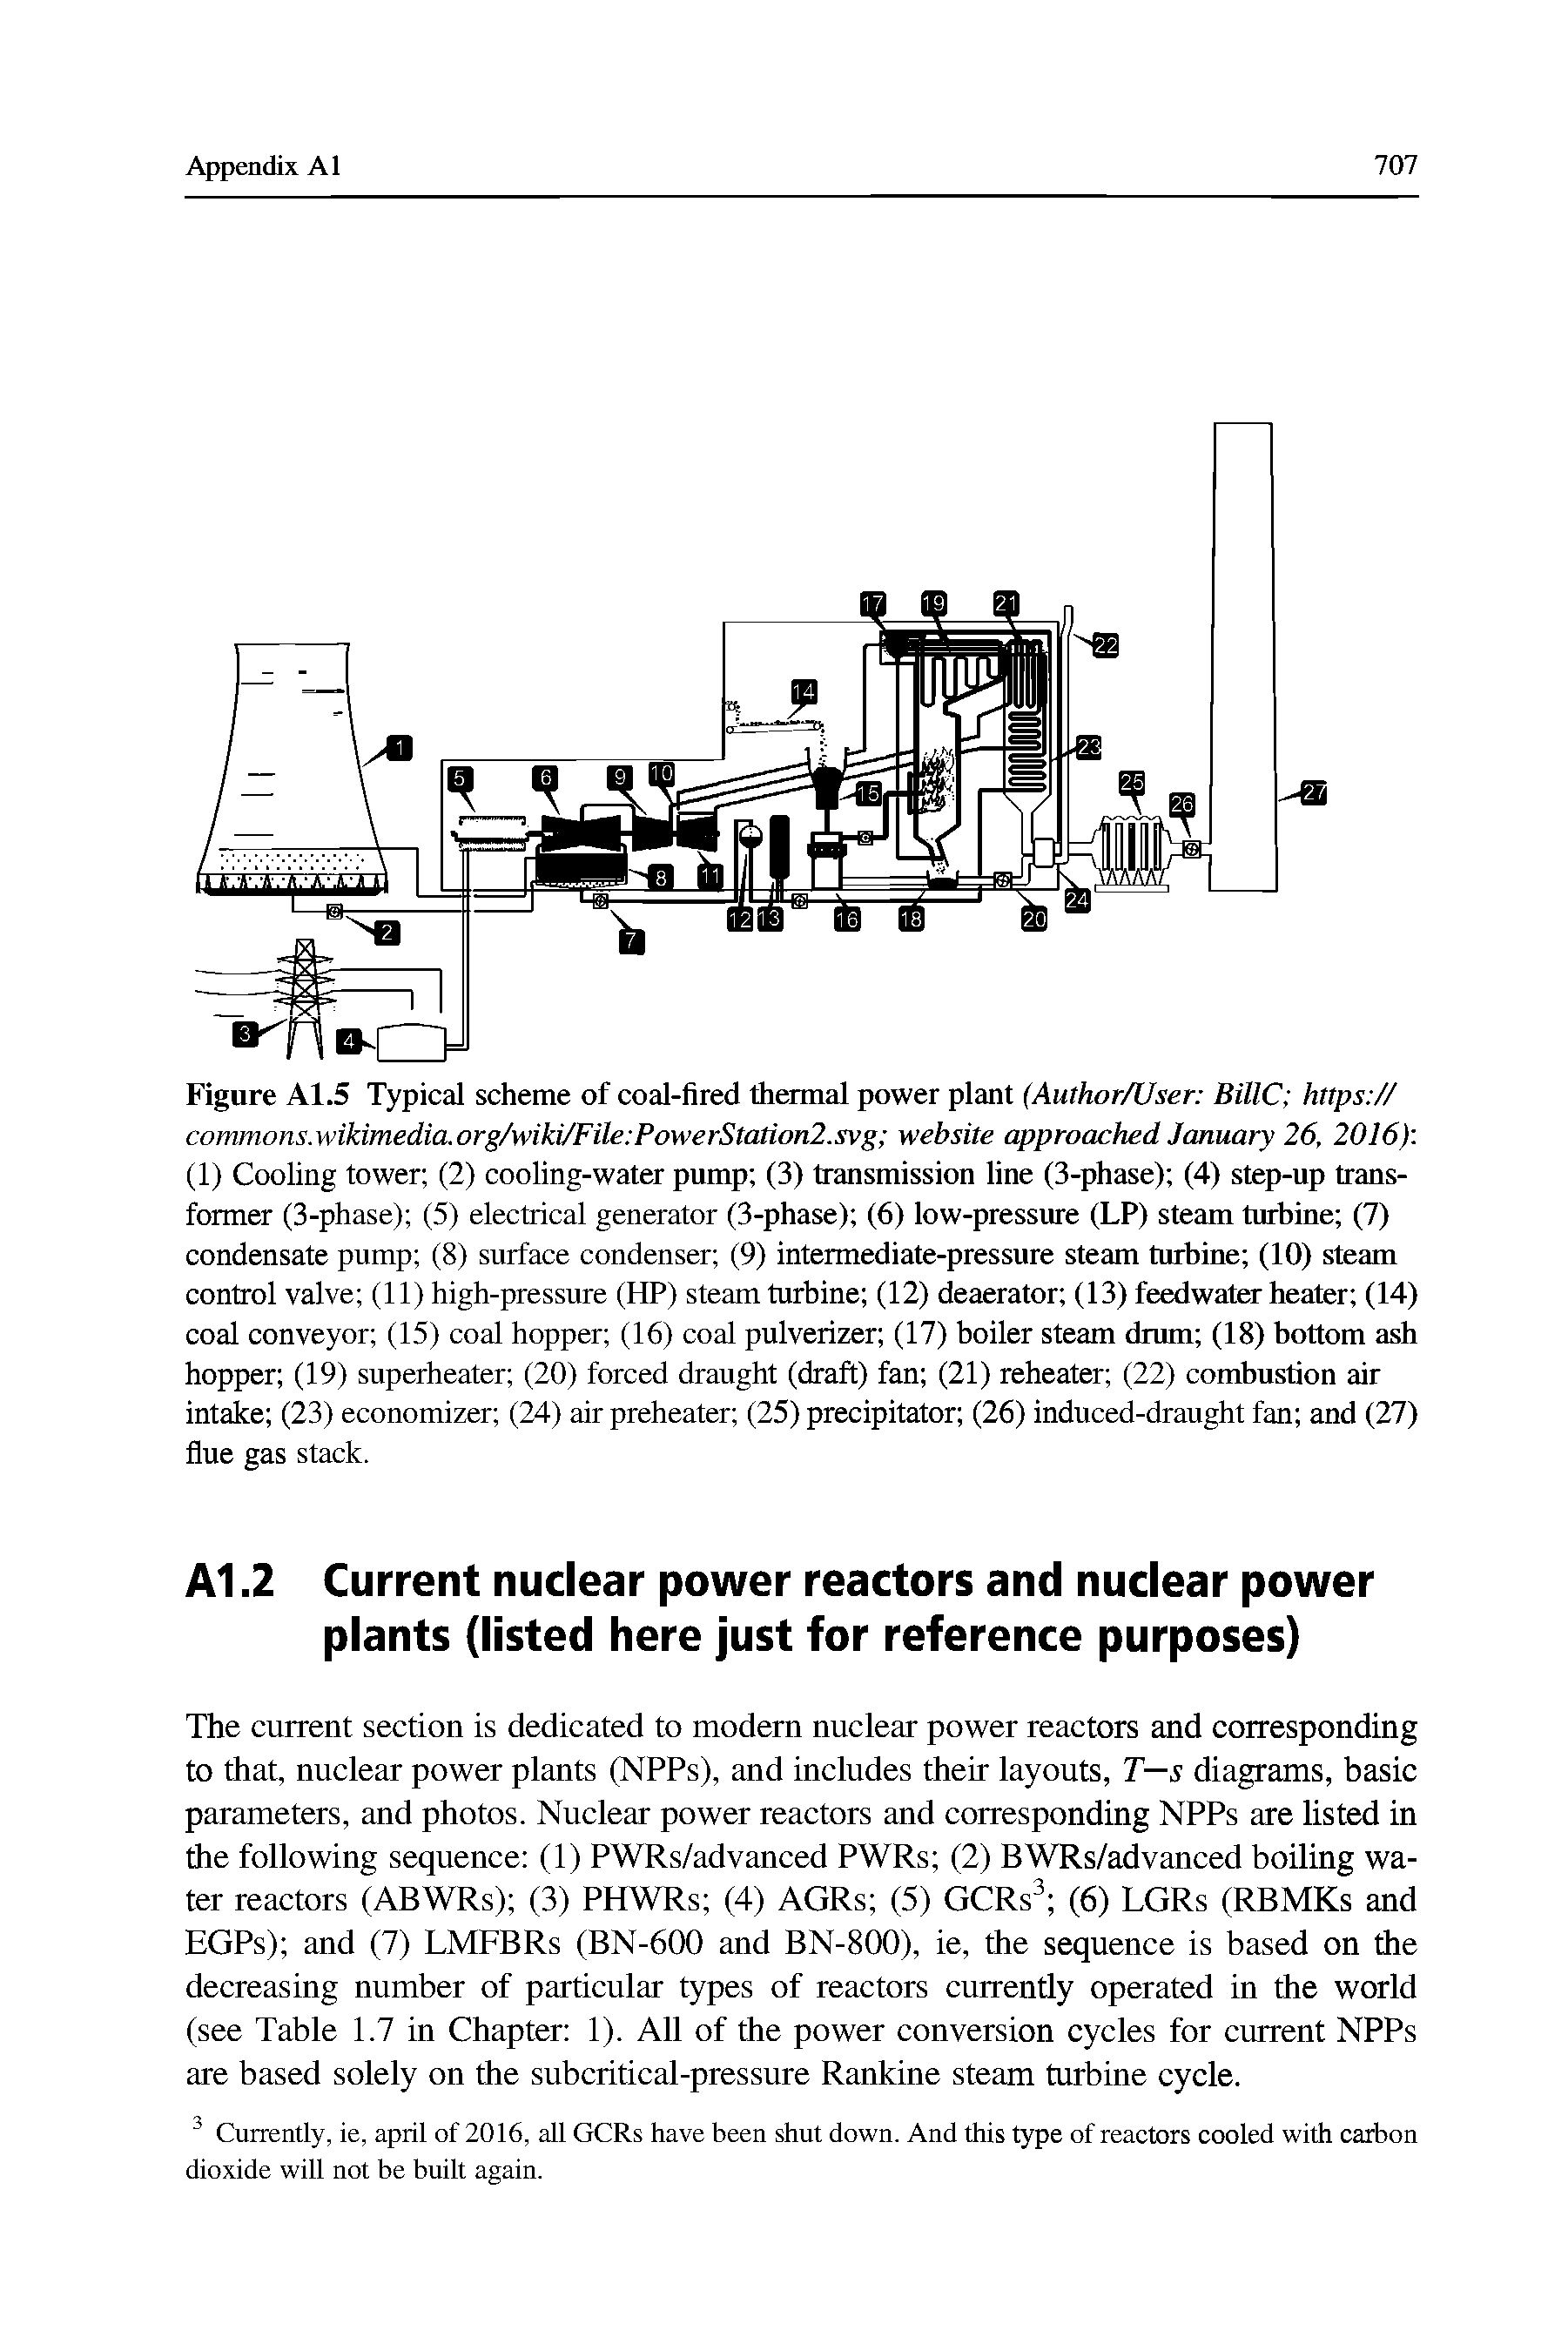 Figure A1.5 Typical scheme of coal-fired thermal power plant (AuthorAJser BillC https // commons.wikimedia.org/wiki/File PowerStation2.svg website approached January 26, 2016) (1) Cooling tower (2) cooling-water pump (3) transmission line (3-phase) (4) step-up transformer (3-phase) (5) electrical generator (3-phase) (6) low-pressure (LP) steam turbine (7) condensate pump (8) surface condenser (9) intermediate-pressure steam turbine (10) steam control valve (11) high-pressure (HP) steam turbine (12) deaerator (13) feedwater heater (14) coal conveyor (15) coal hopper (16) coal pulverizer (17) boiler steam drum (18) bottom ash hopper (19) superheater (20) forced draught (draft) fan (21) reheater (22) combustion air intake (23) economizer (24) air preheater (25) precipitator (26) induced-draught fan and (27) flue gas stack.